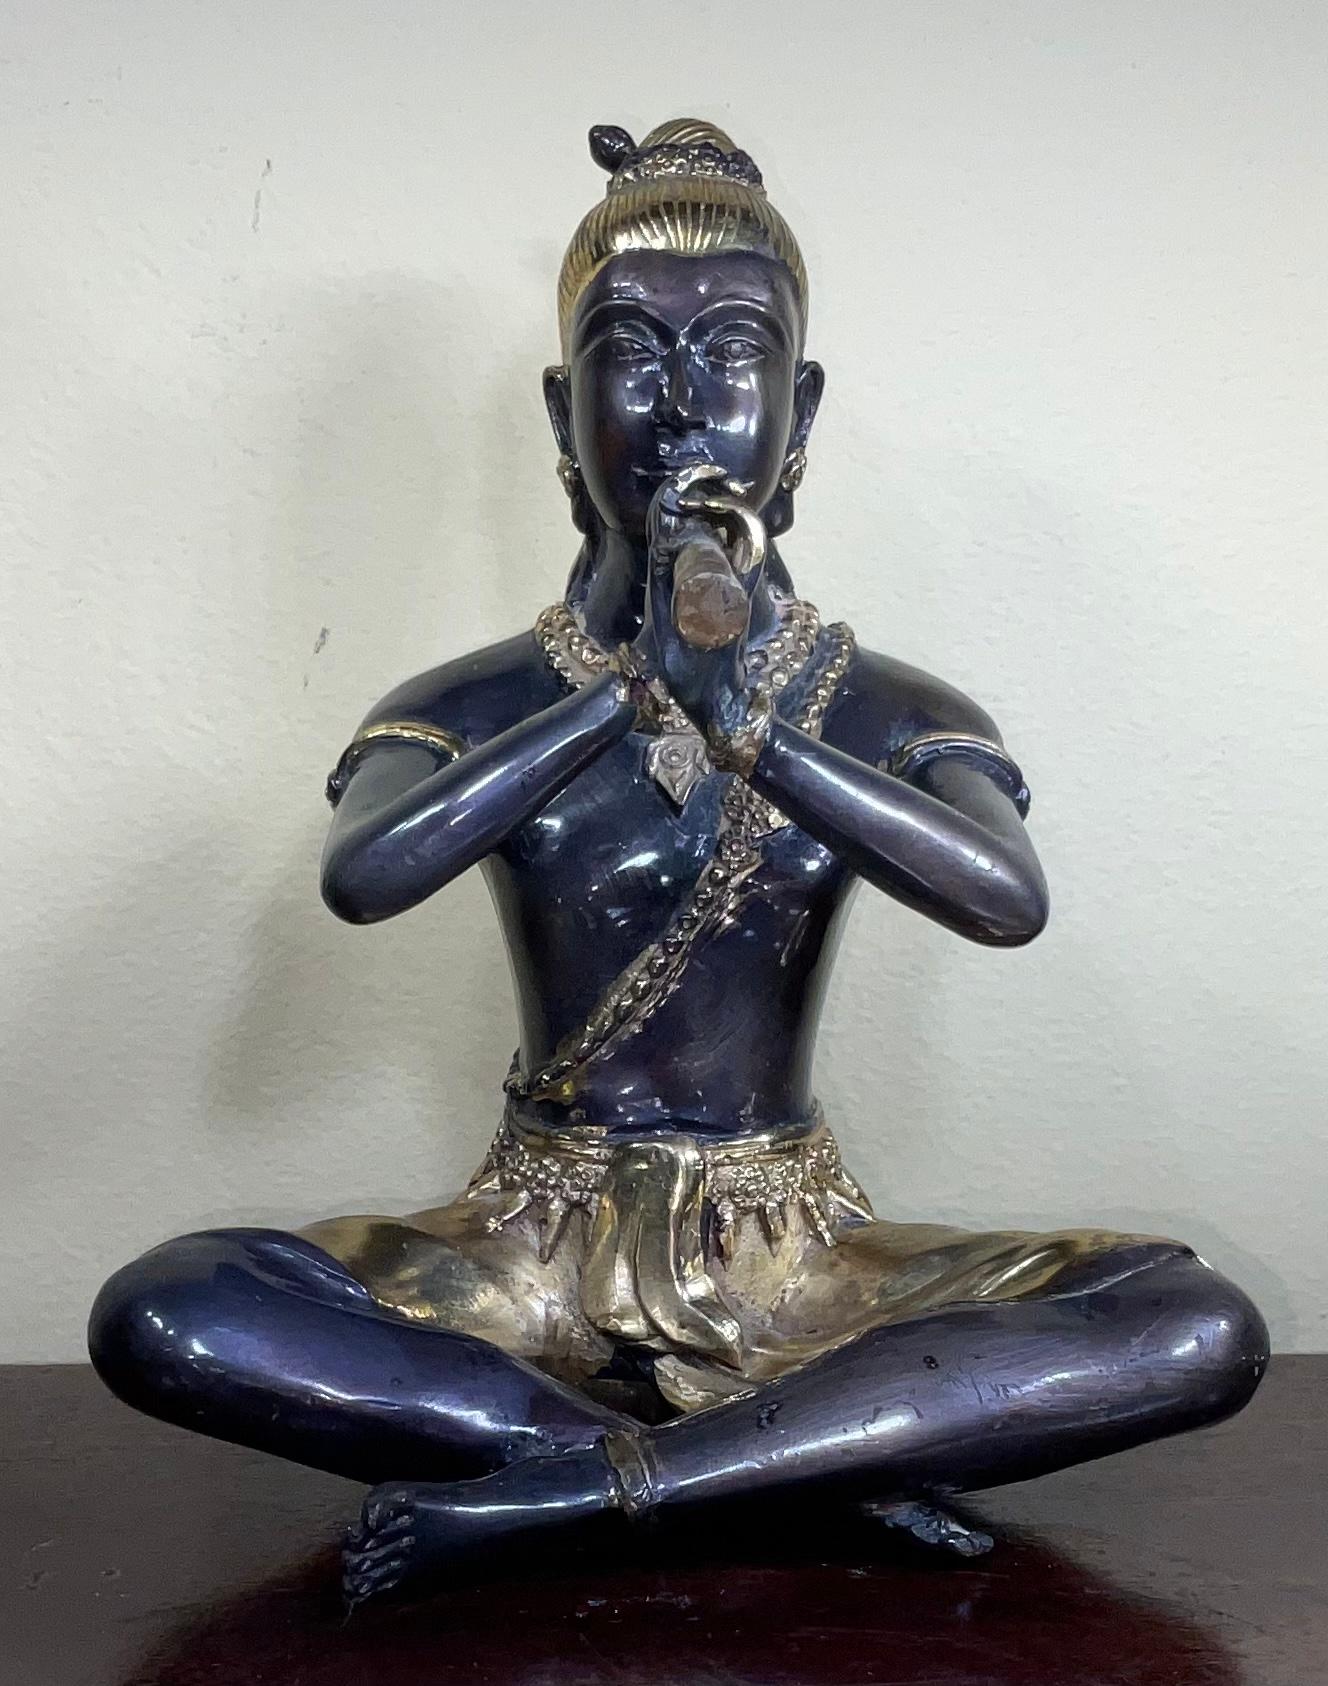 Oriental sculpture figure statue made of bronze Study of a musician, beautiful facial expression with two tone of patina gray and gold, solid bronze .
Great object of art for display.